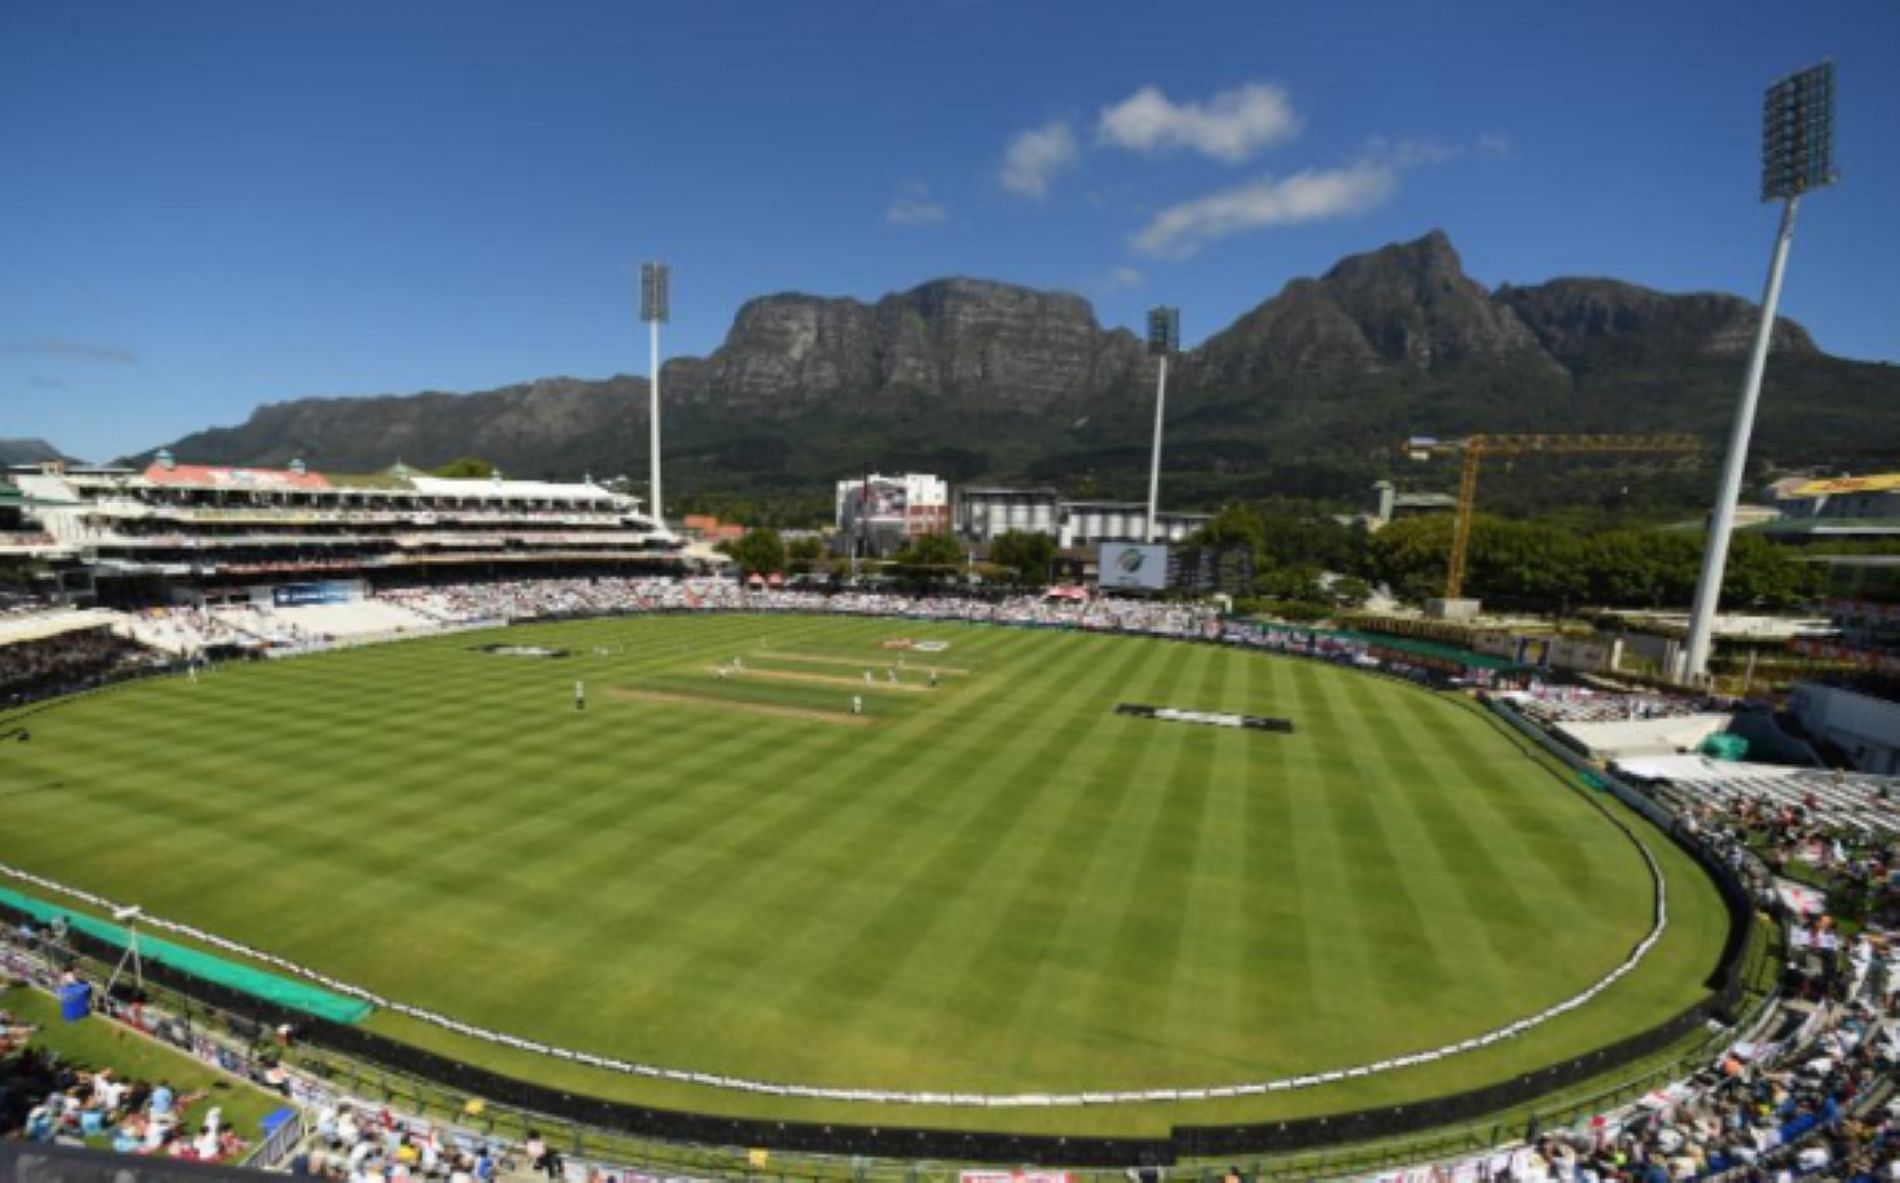 The Cape Town wicket is among the rare ones independent of the toss.